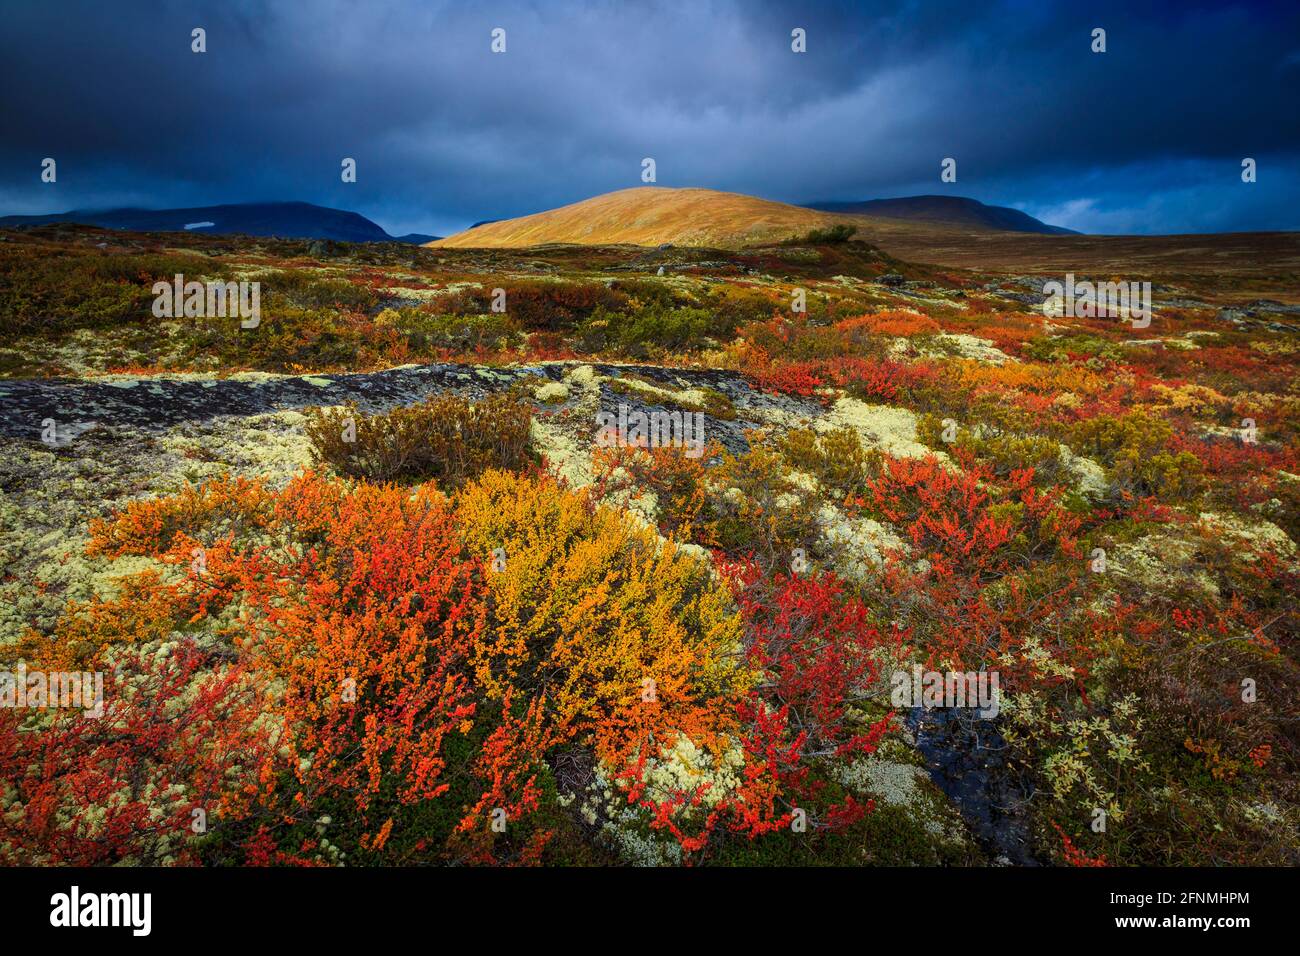 Sunlit mountain and striking autumn colors in the open and vast landscapes in Dovrefjell national park, Dovre kommune, Norway, Scandinavia. Stock Photo